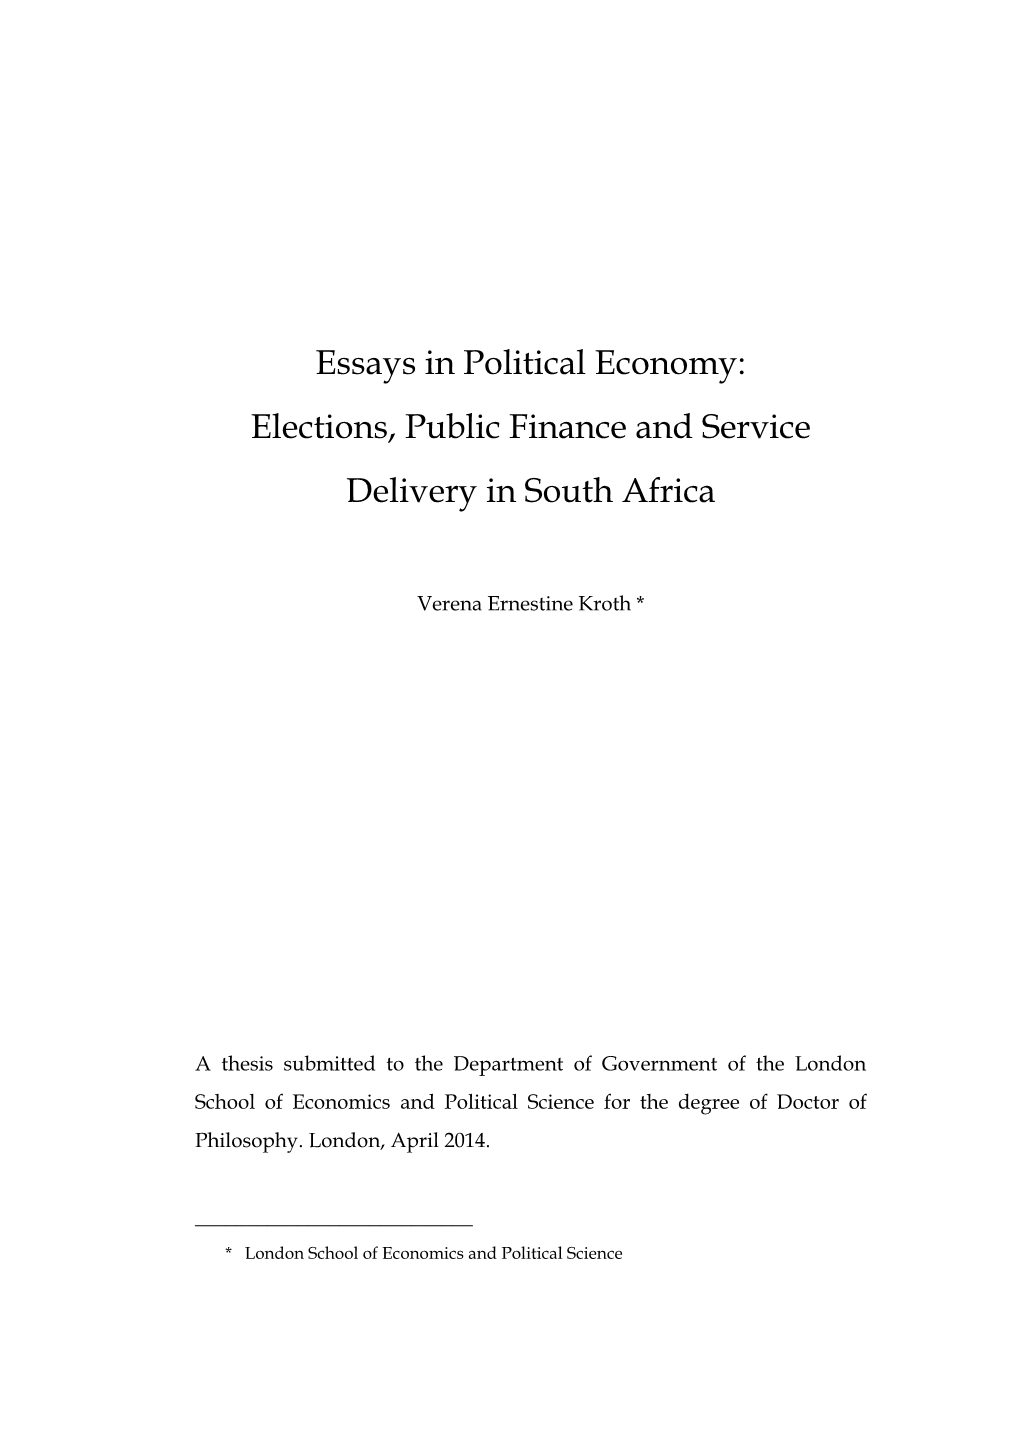 Essays in Political Economy: Elections, Public Finance and Service Delivery in South Africa